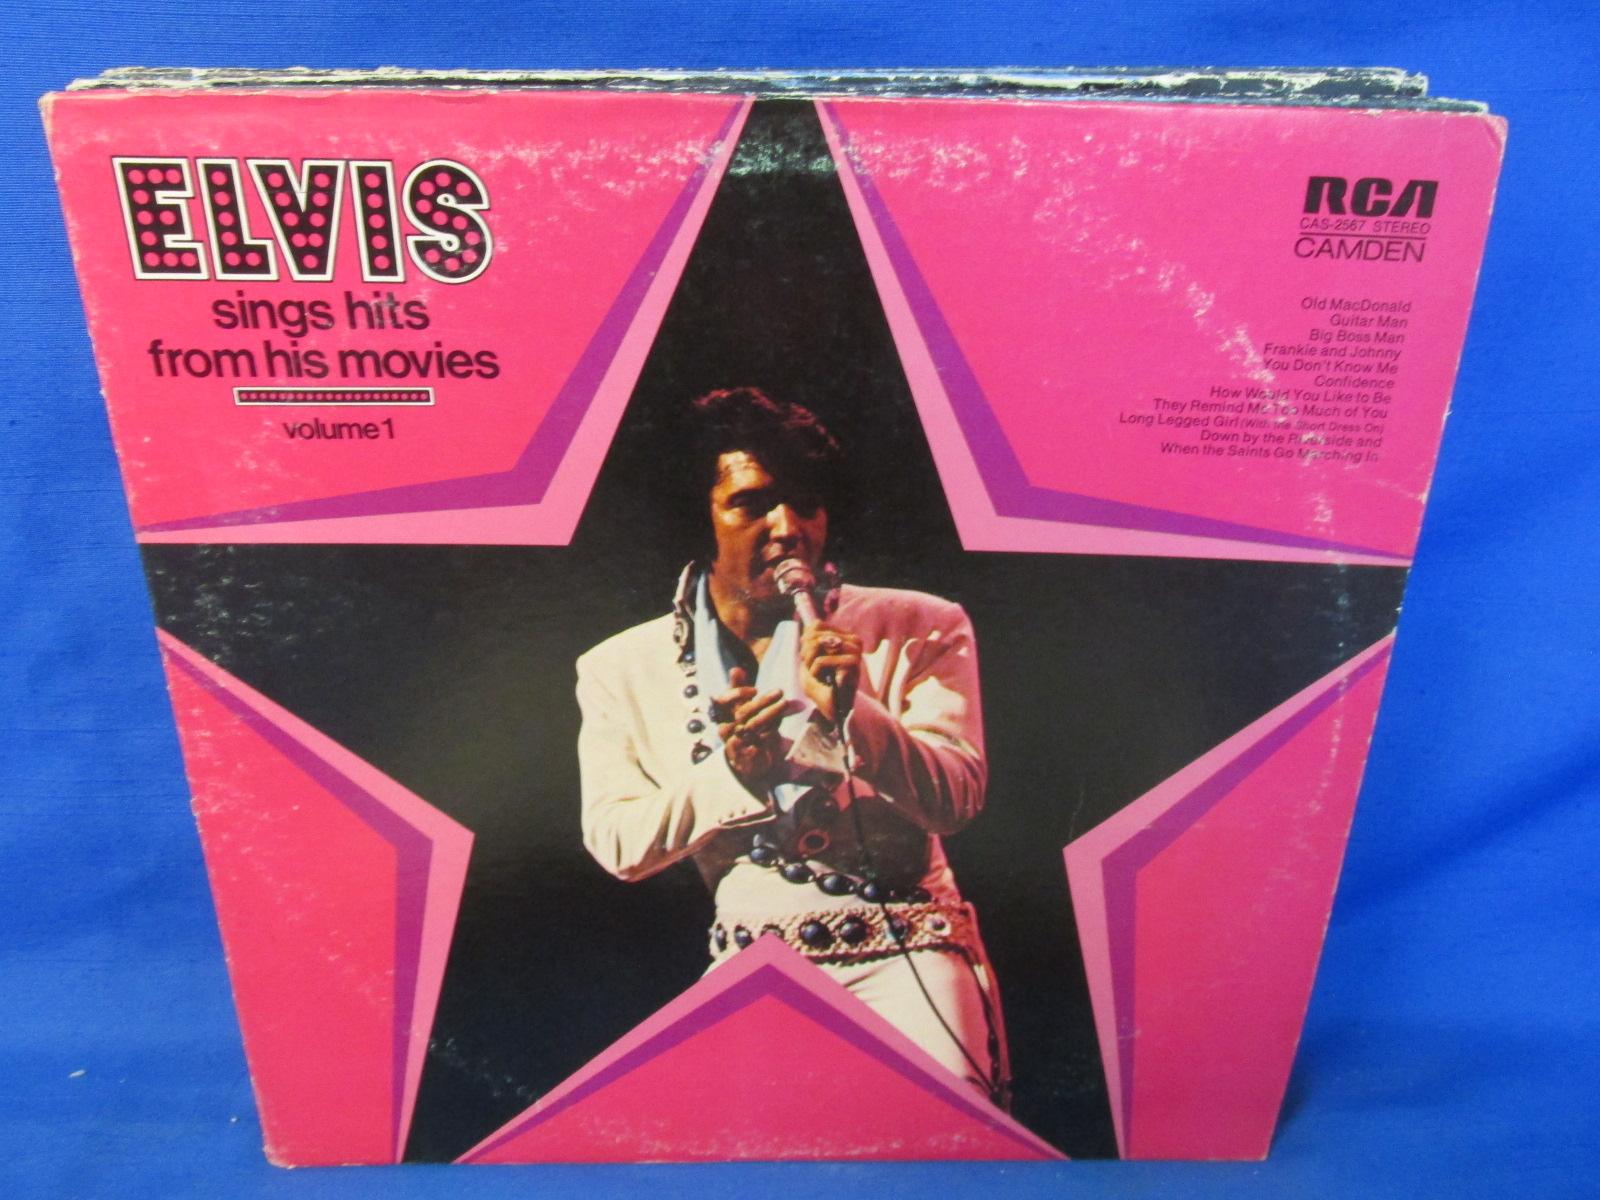 16 Elvis Presley Albums – Please see Photos For Titles – Covers